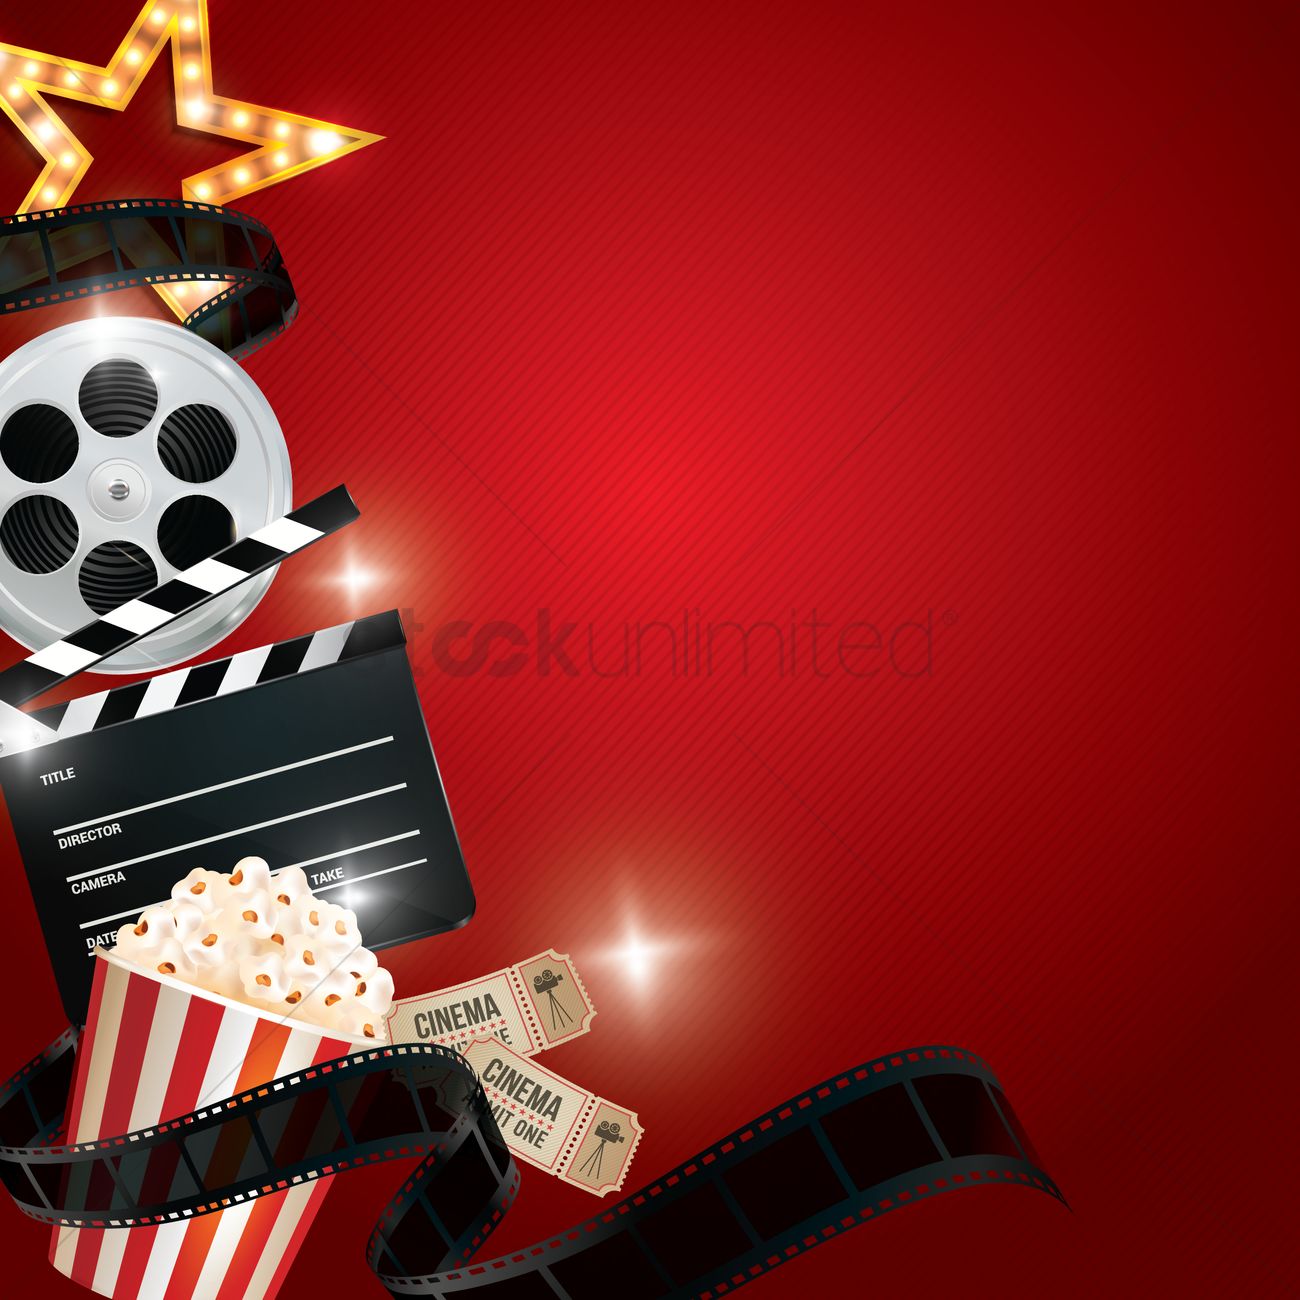 Cinema background with movie objects Vector Image